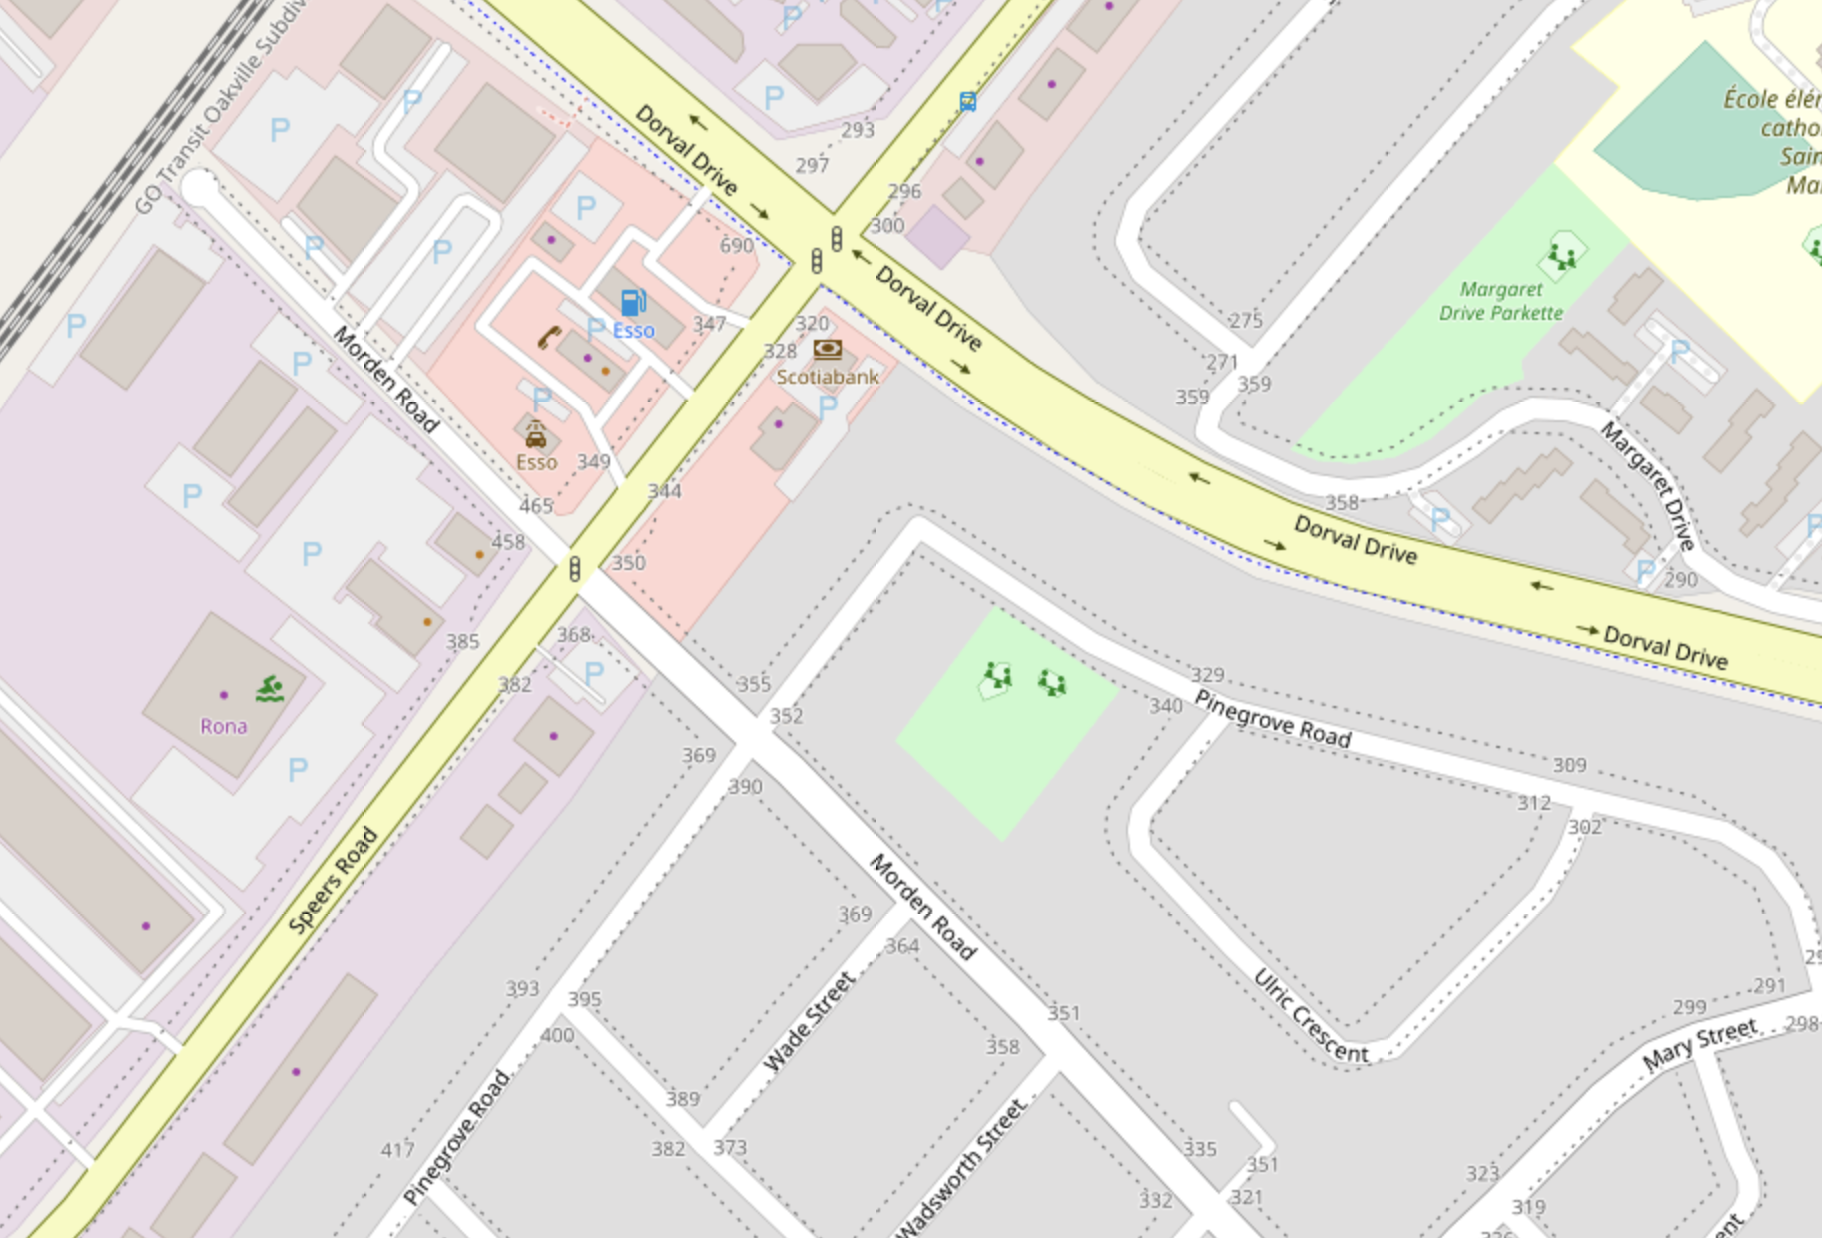 Pinegrove Road and Morden Road | Openstreetmap